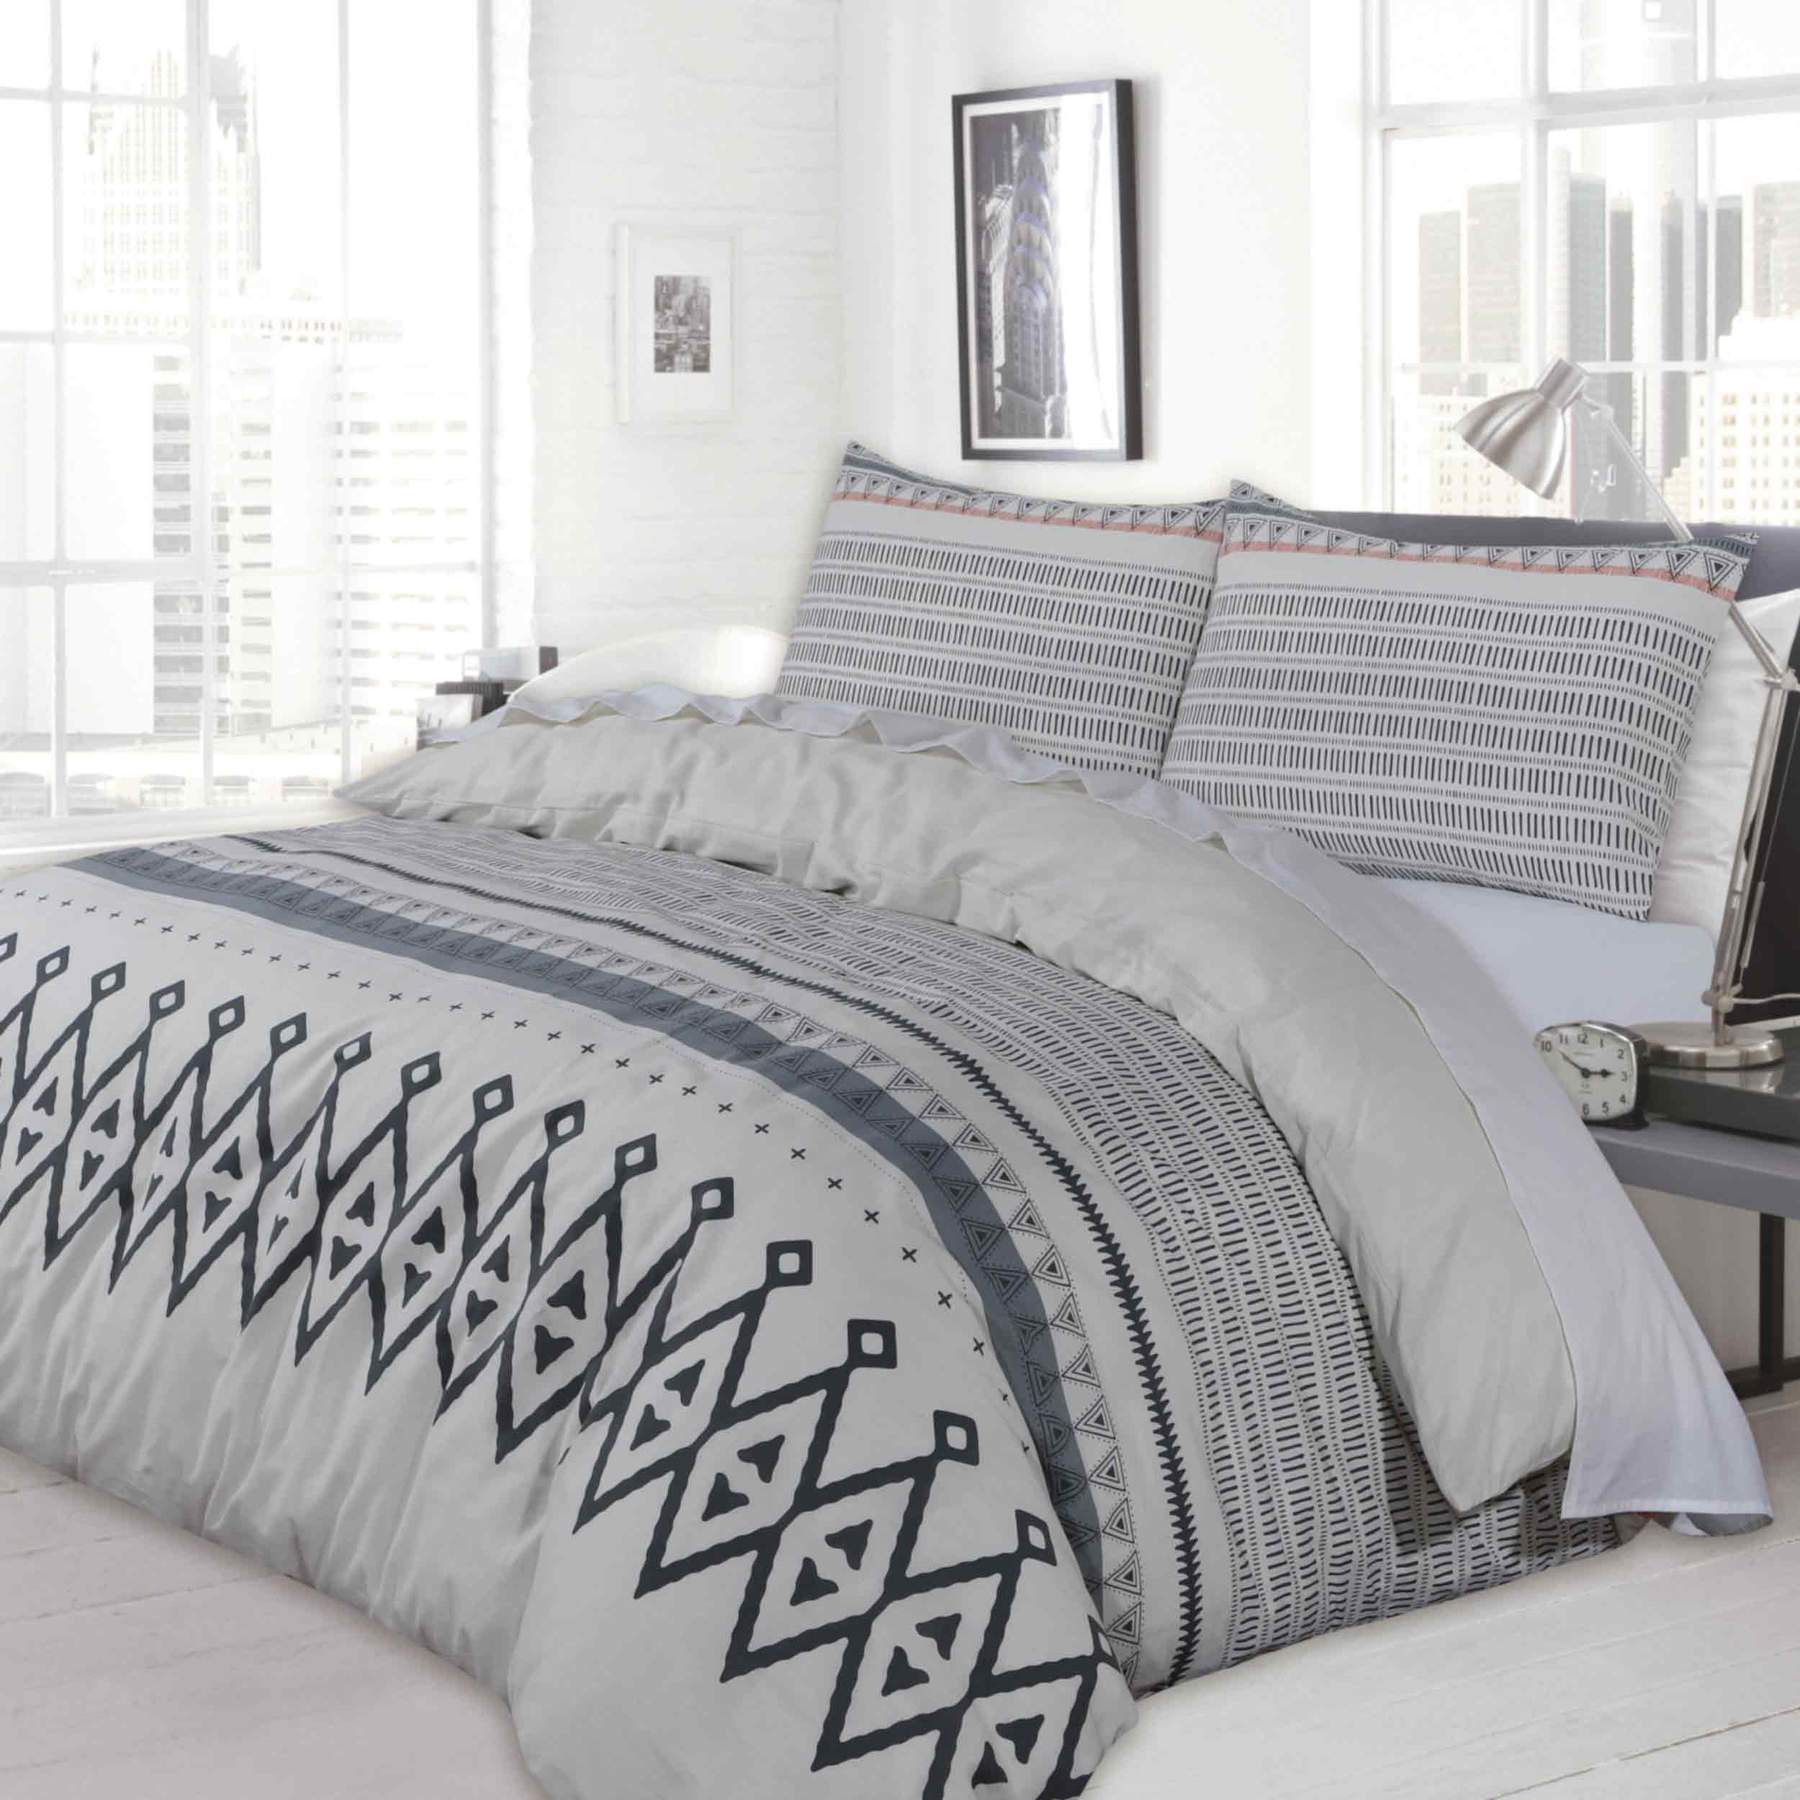 Egyptian Stripe Comforter with Pillow Covers